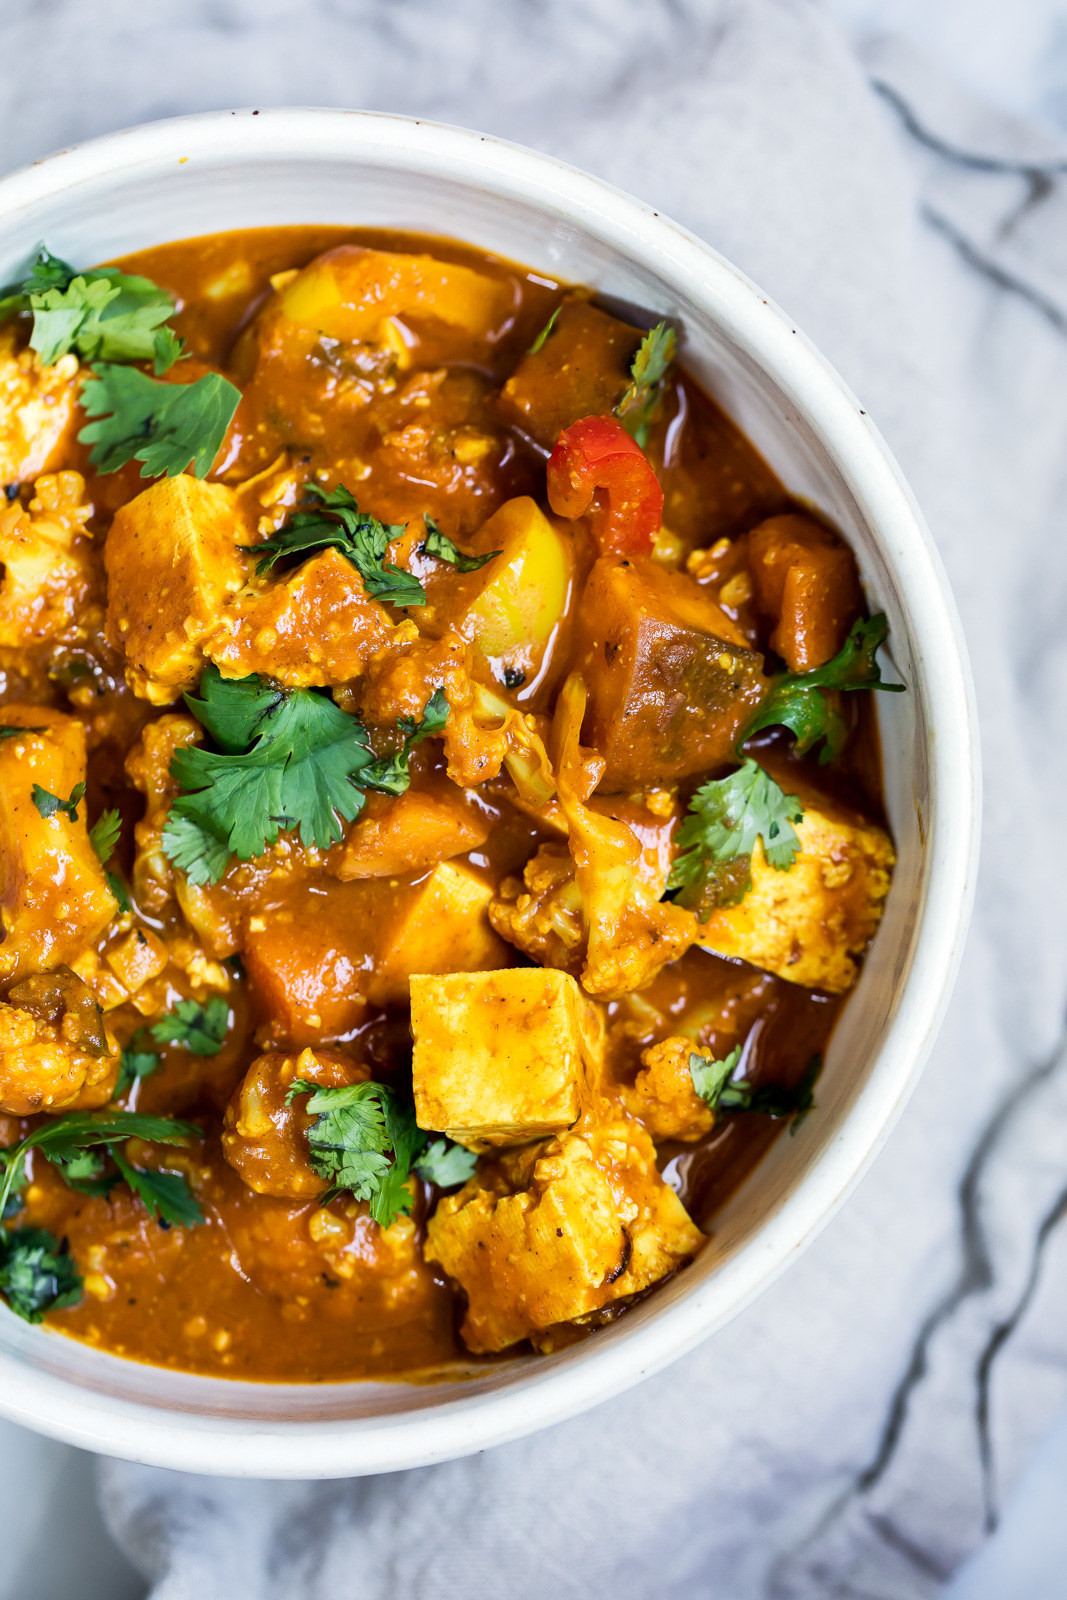 Vegetarian Recipes With Tofu
 32 Vegan Fall Recipes With No Meat Dairy